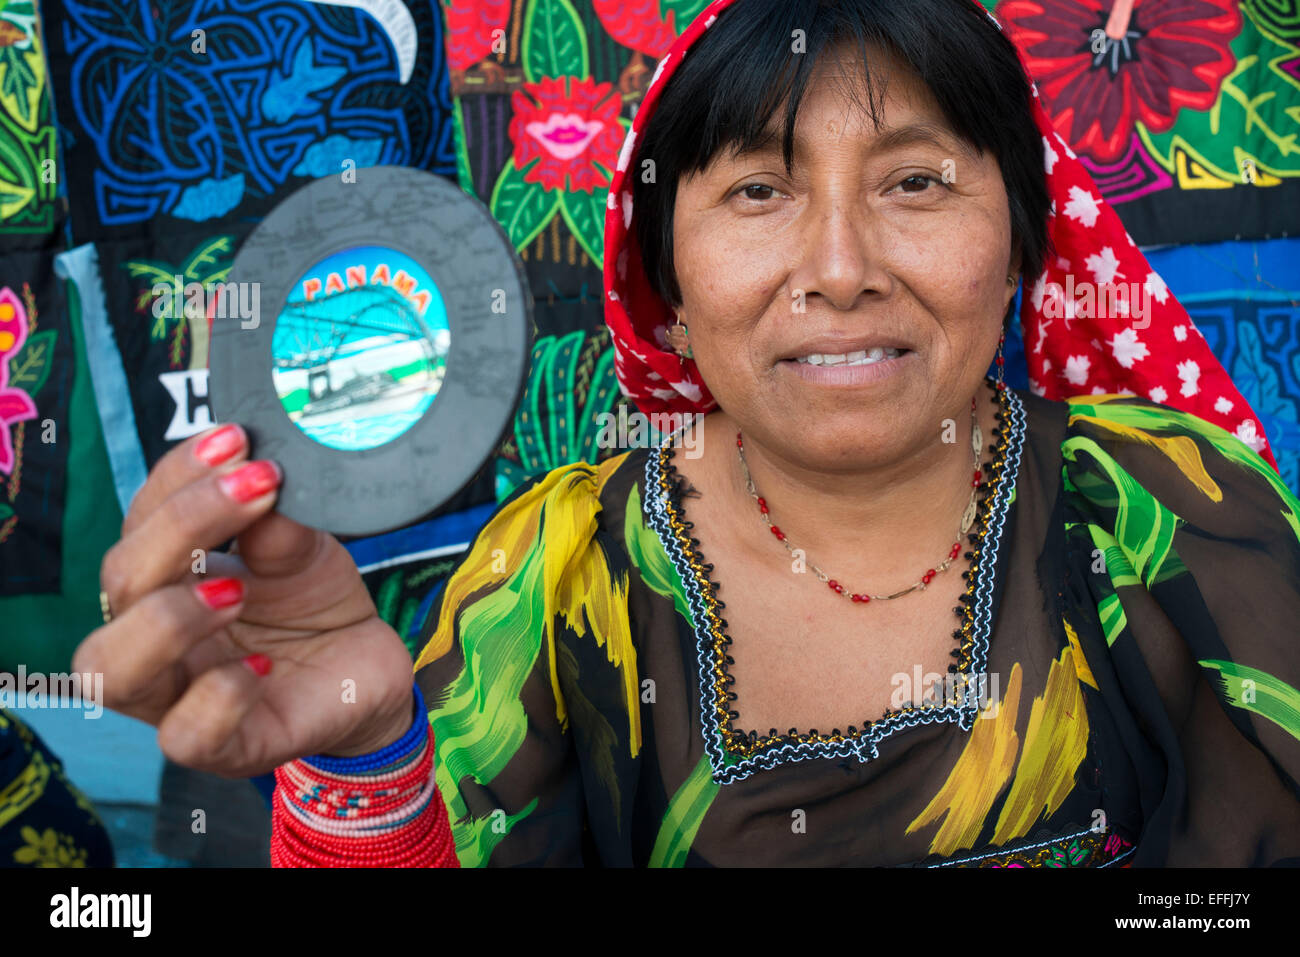 Kuna women sell their molas to the tourists. Panama City Casco Viejo kuna indian traditional handicraft items sellers by kuna tr Stock Photo